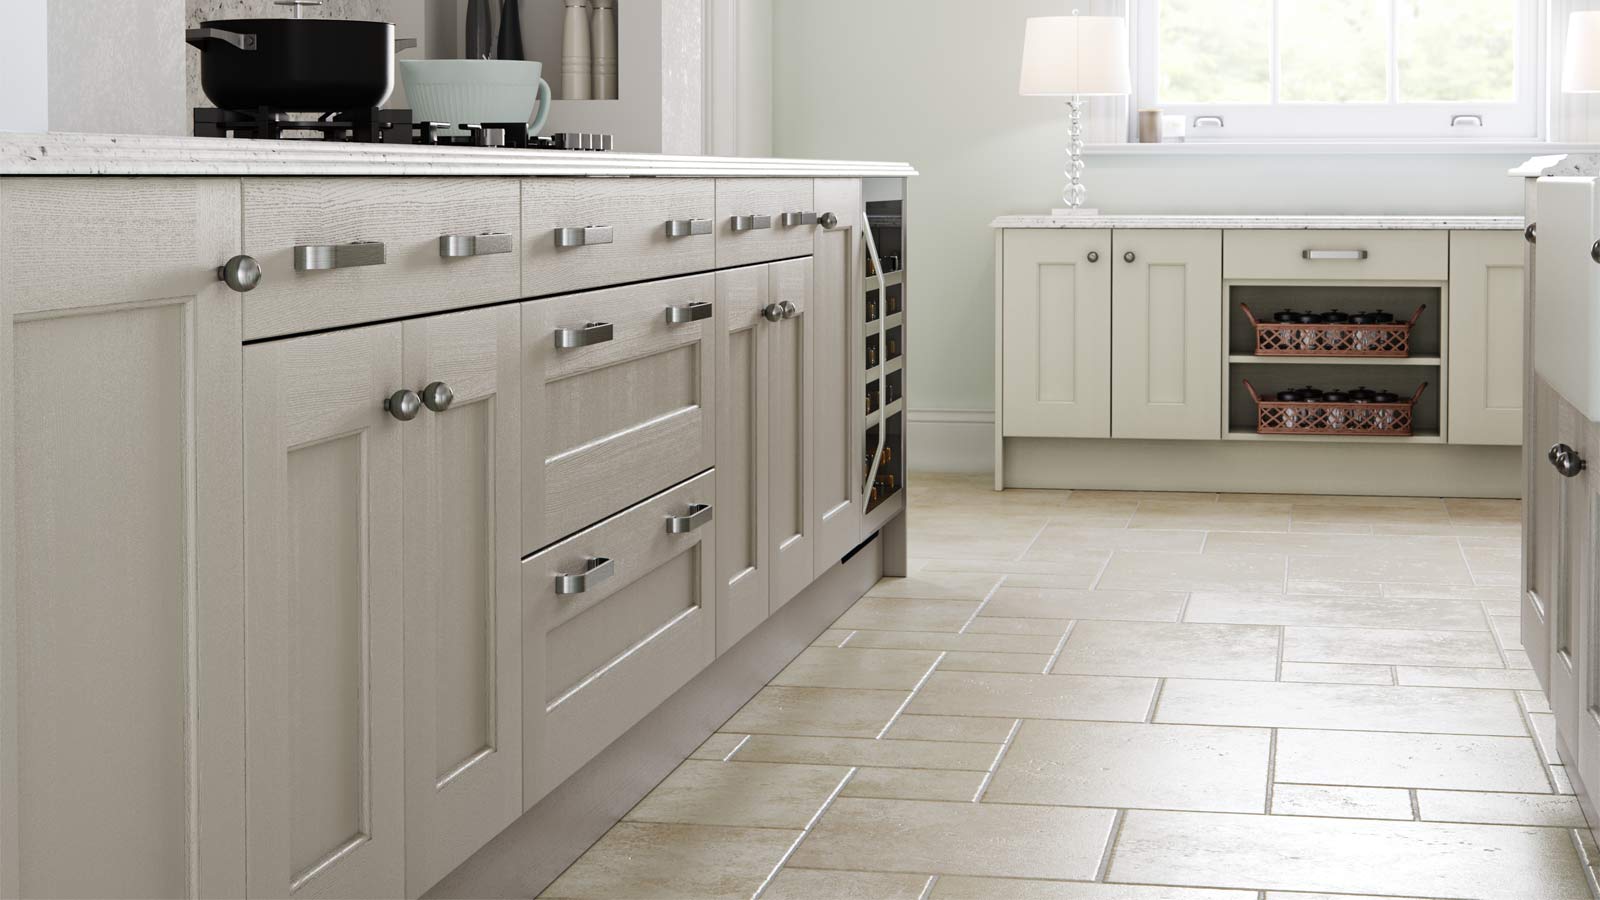 Traditional kitchen cupboard doors featuring a range of kitchen handles